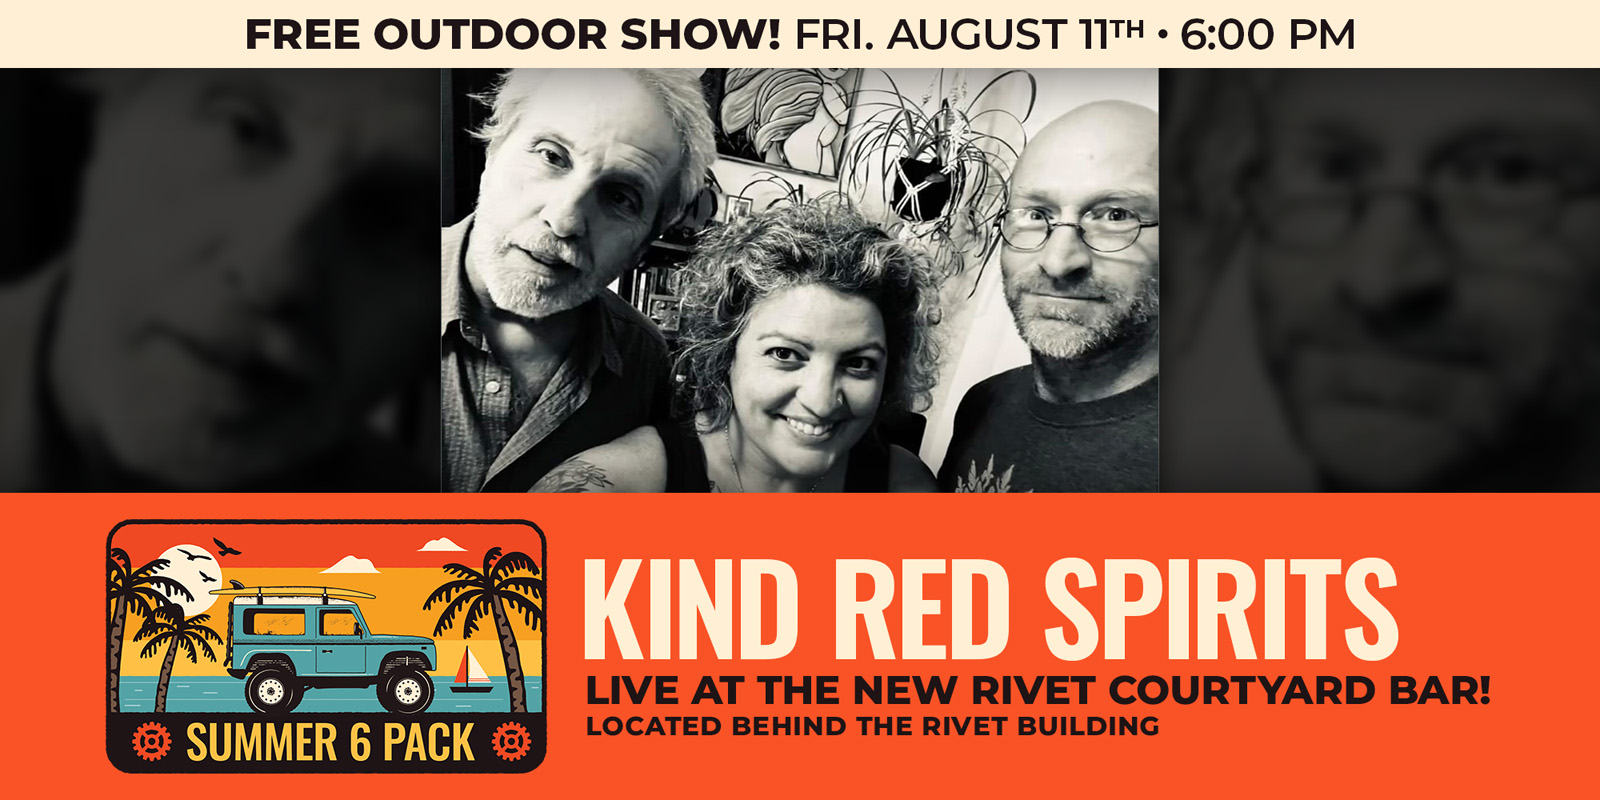 The Rivet Free Outdoor Series continues with Kind Red Spirits live on the Courtyard Bar Stage! Featuring: Michele Kienle, Cameron Downie, Andy Mann, and Dave Schaeffer! Event Date: Friday, August 11th, 2023.